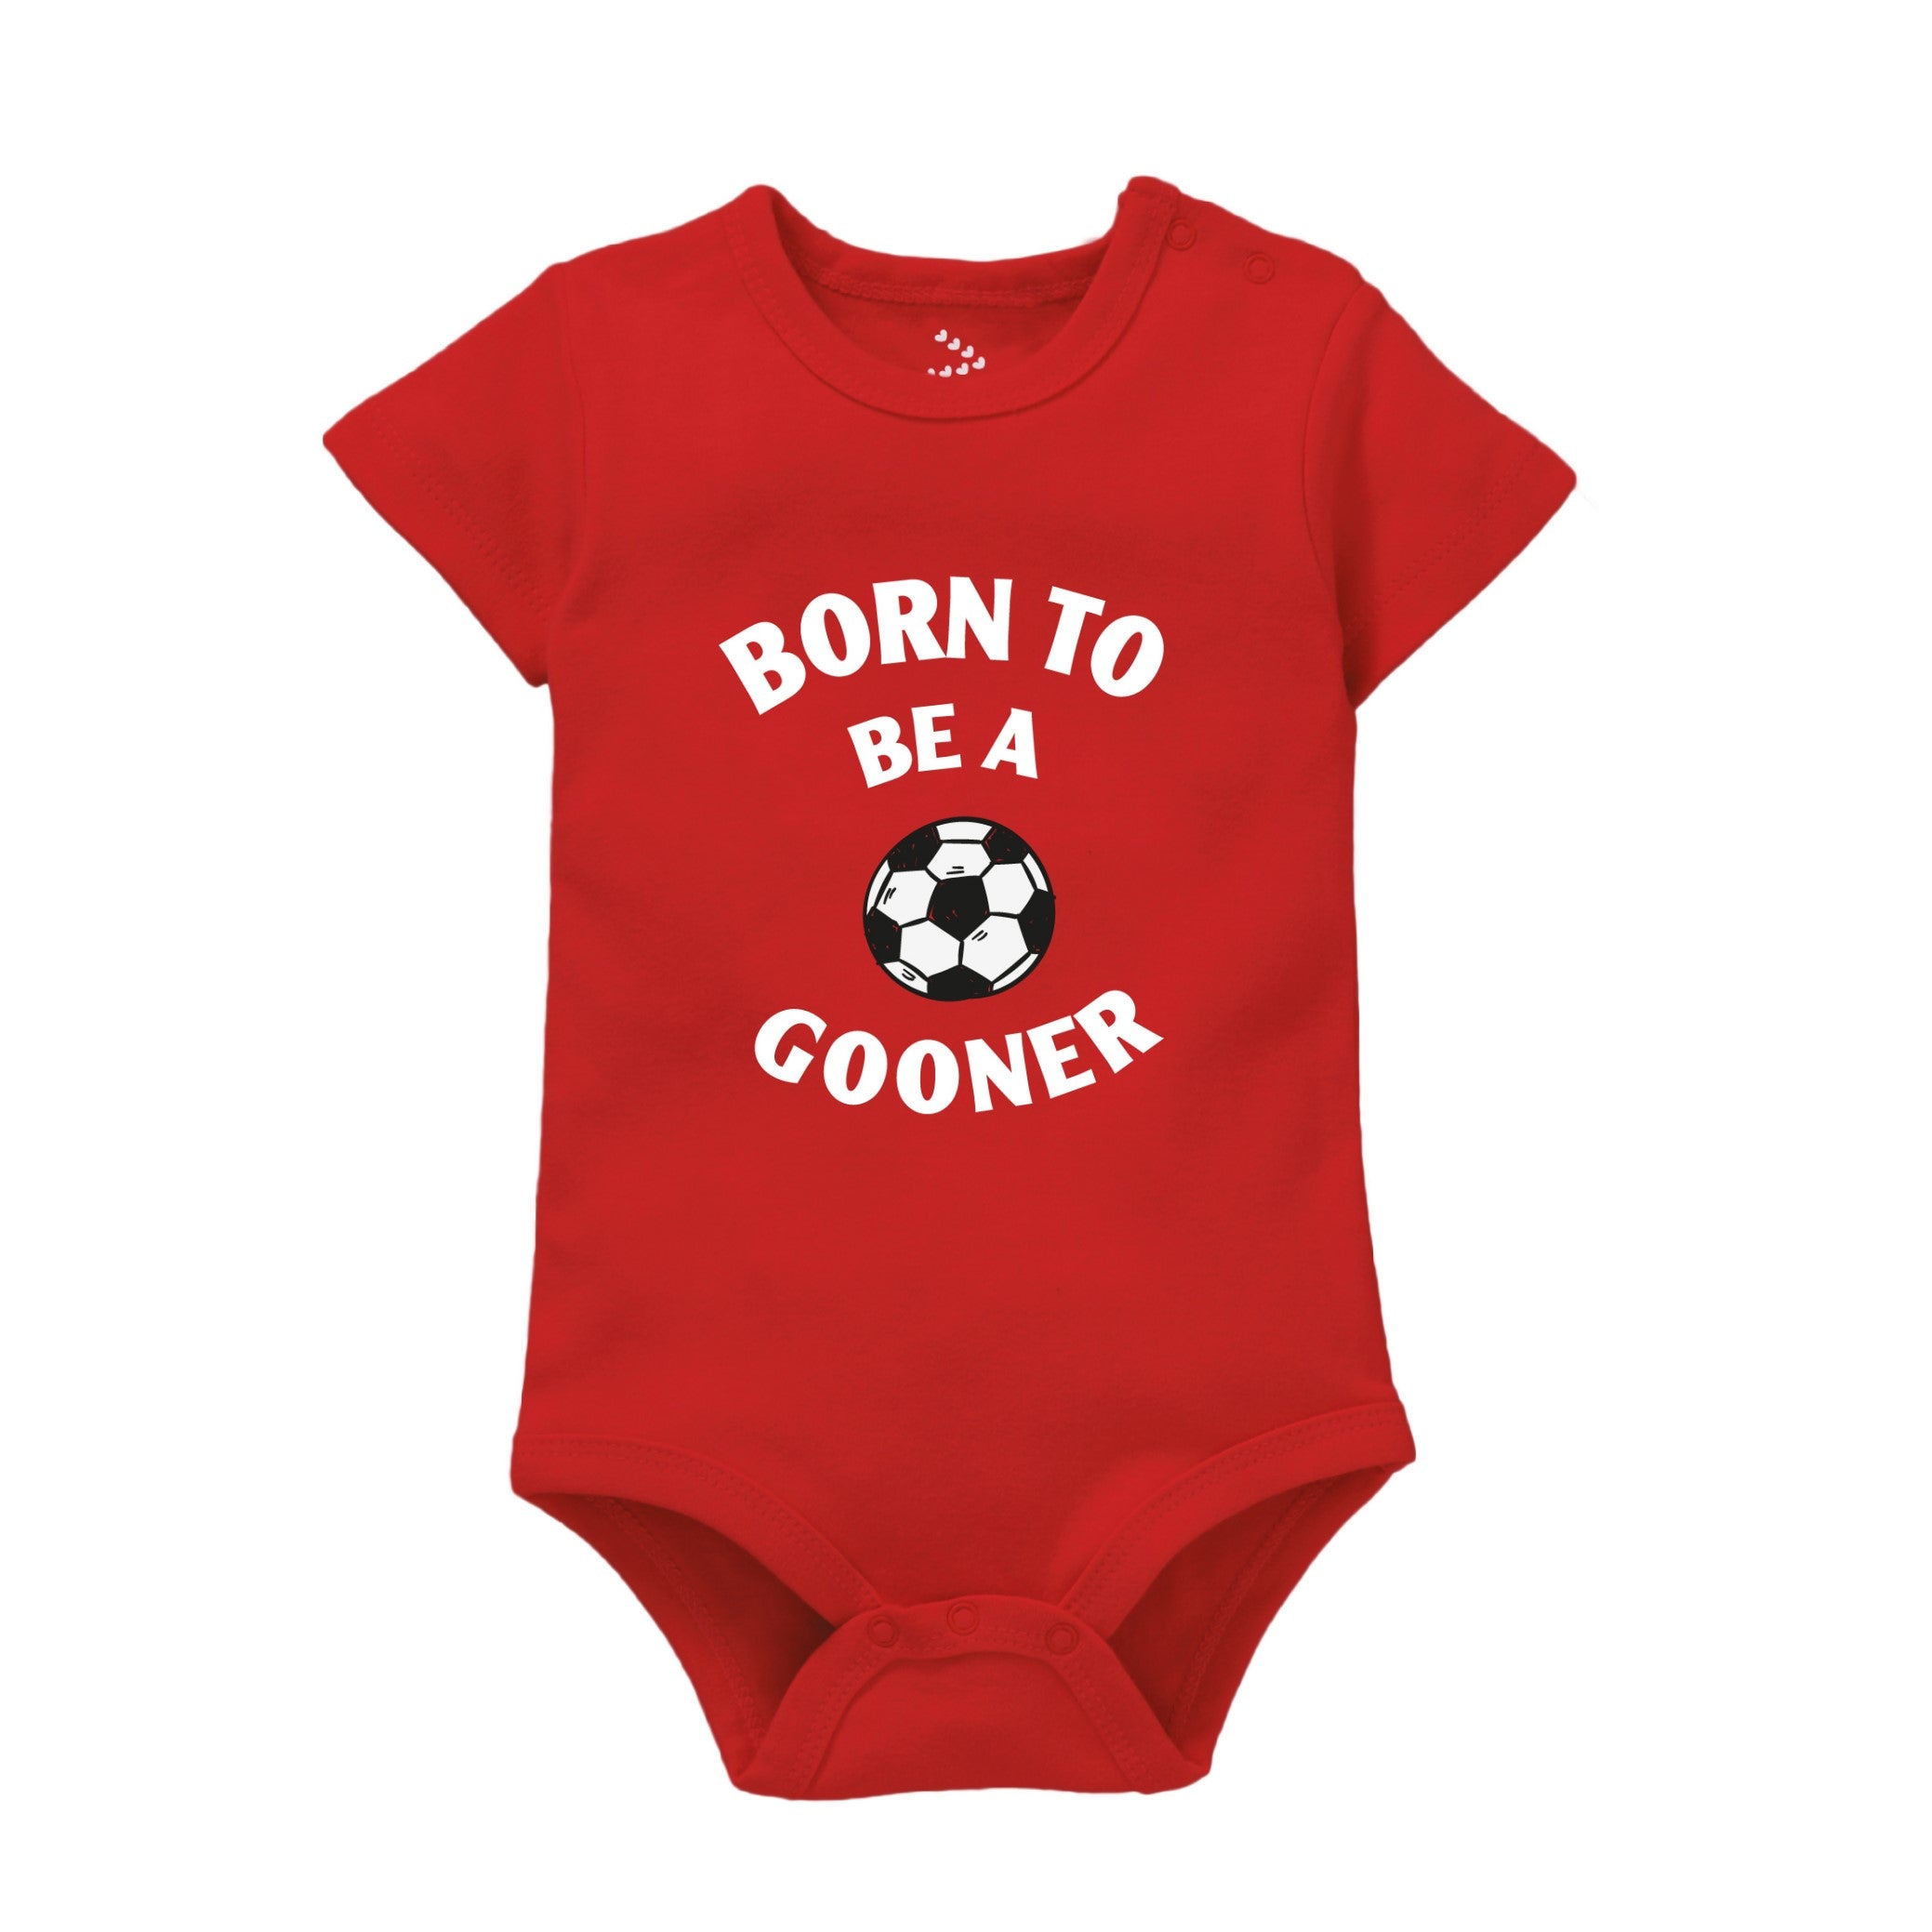 Born To Be A Gooner